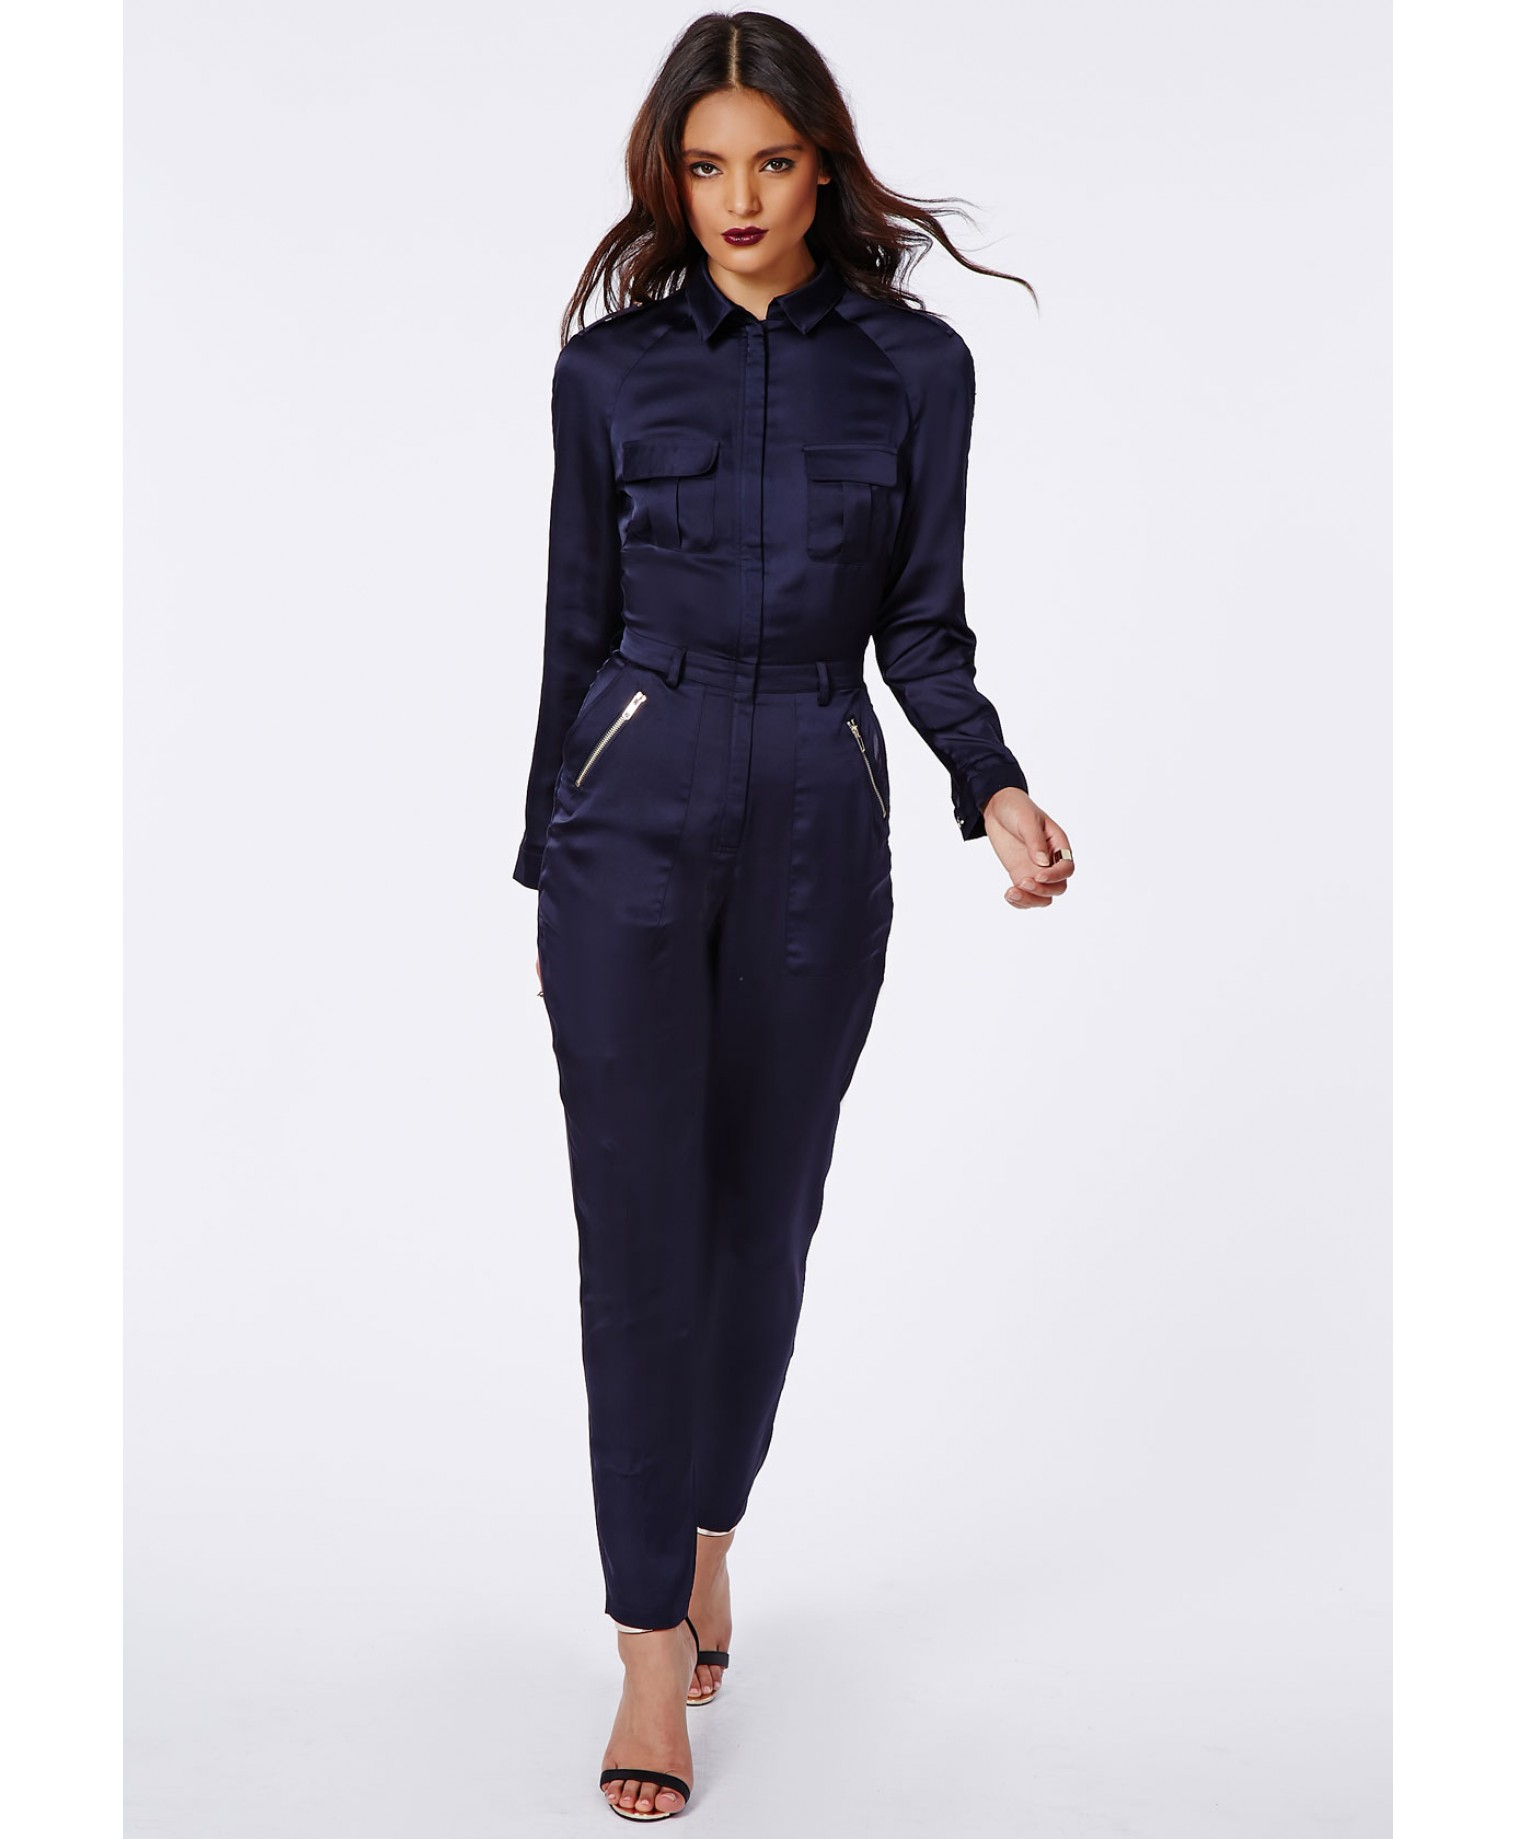 Missguided Annabelle Utility Style Long Sleeve Jumpsuit Navy in Blue - Lyst